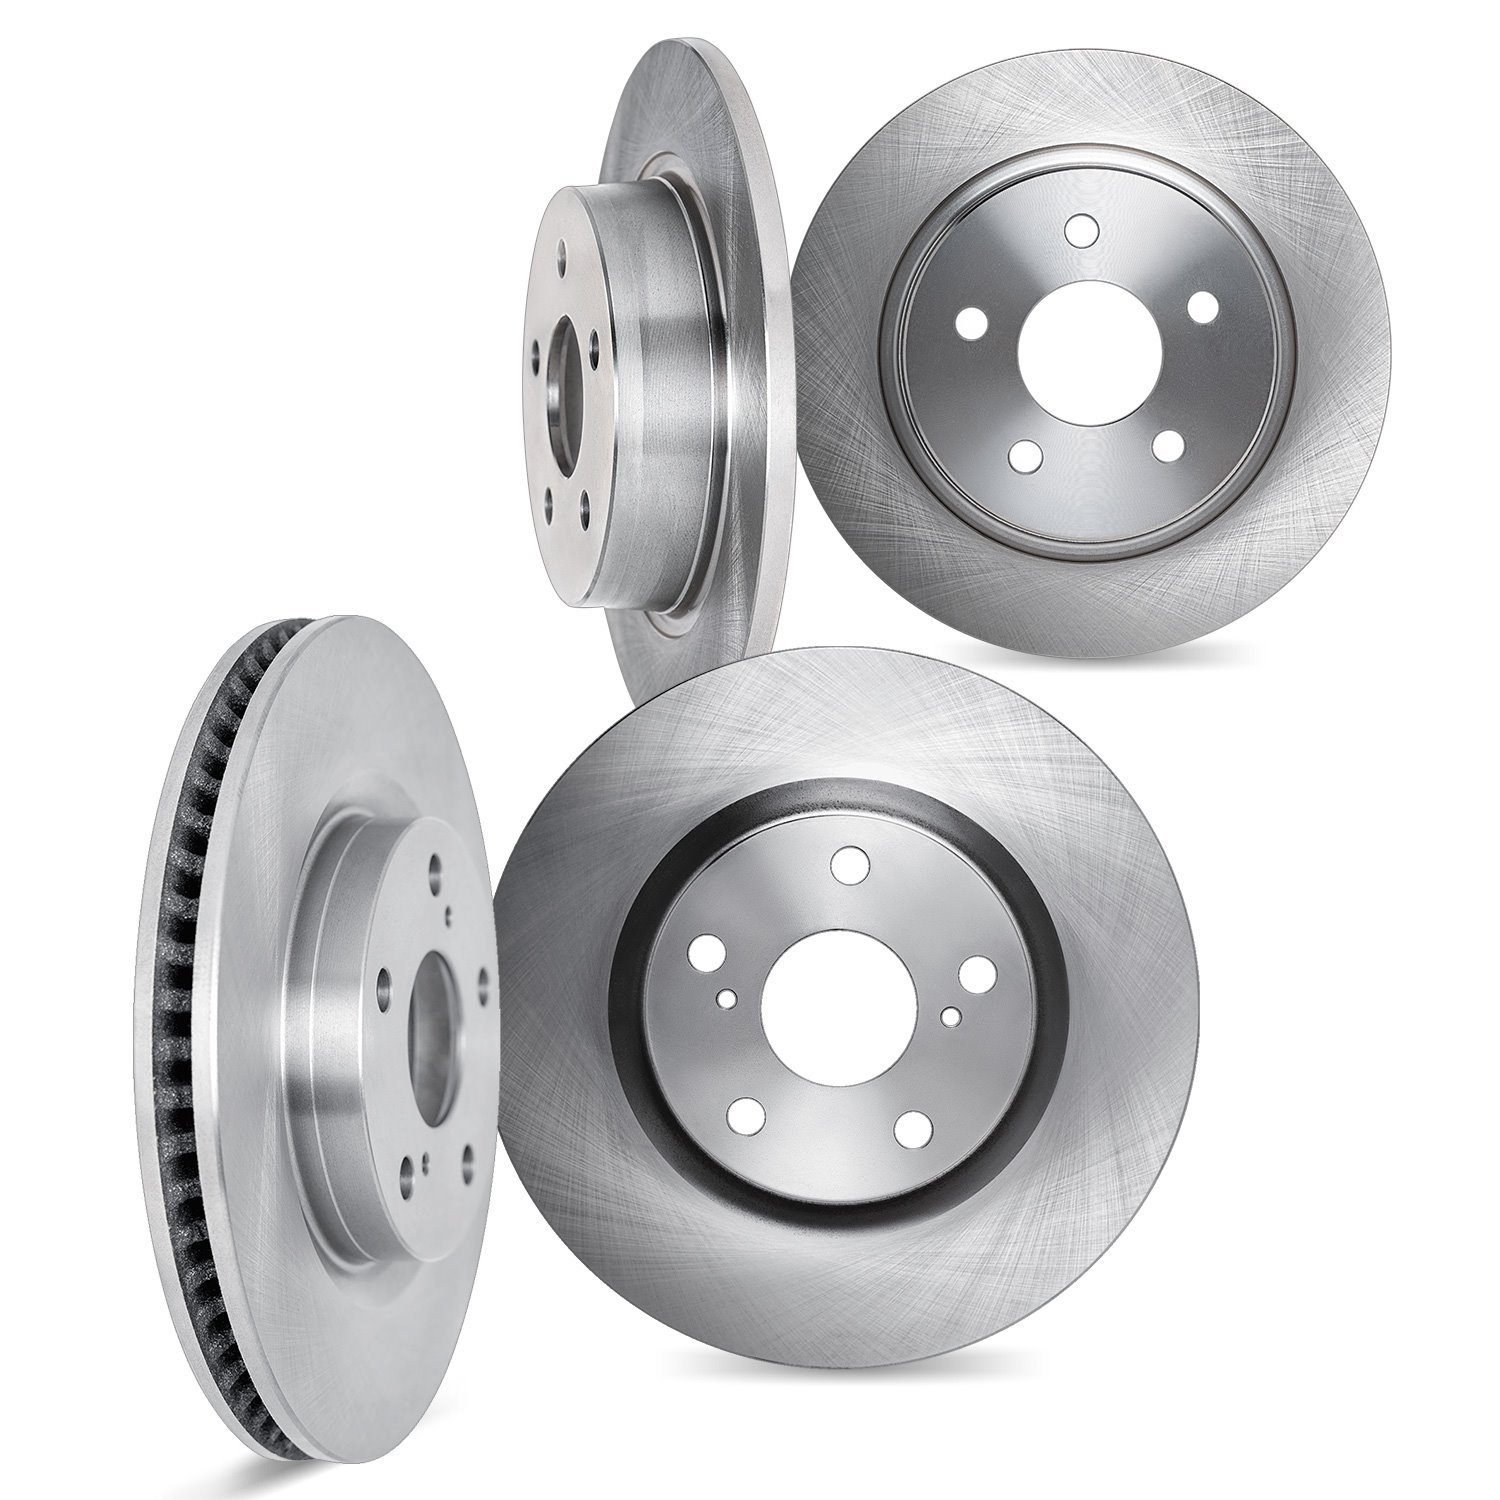 6004-67082 Brake Rotors, Fits Select Infiniti/Nissan, Position: Front and Rear